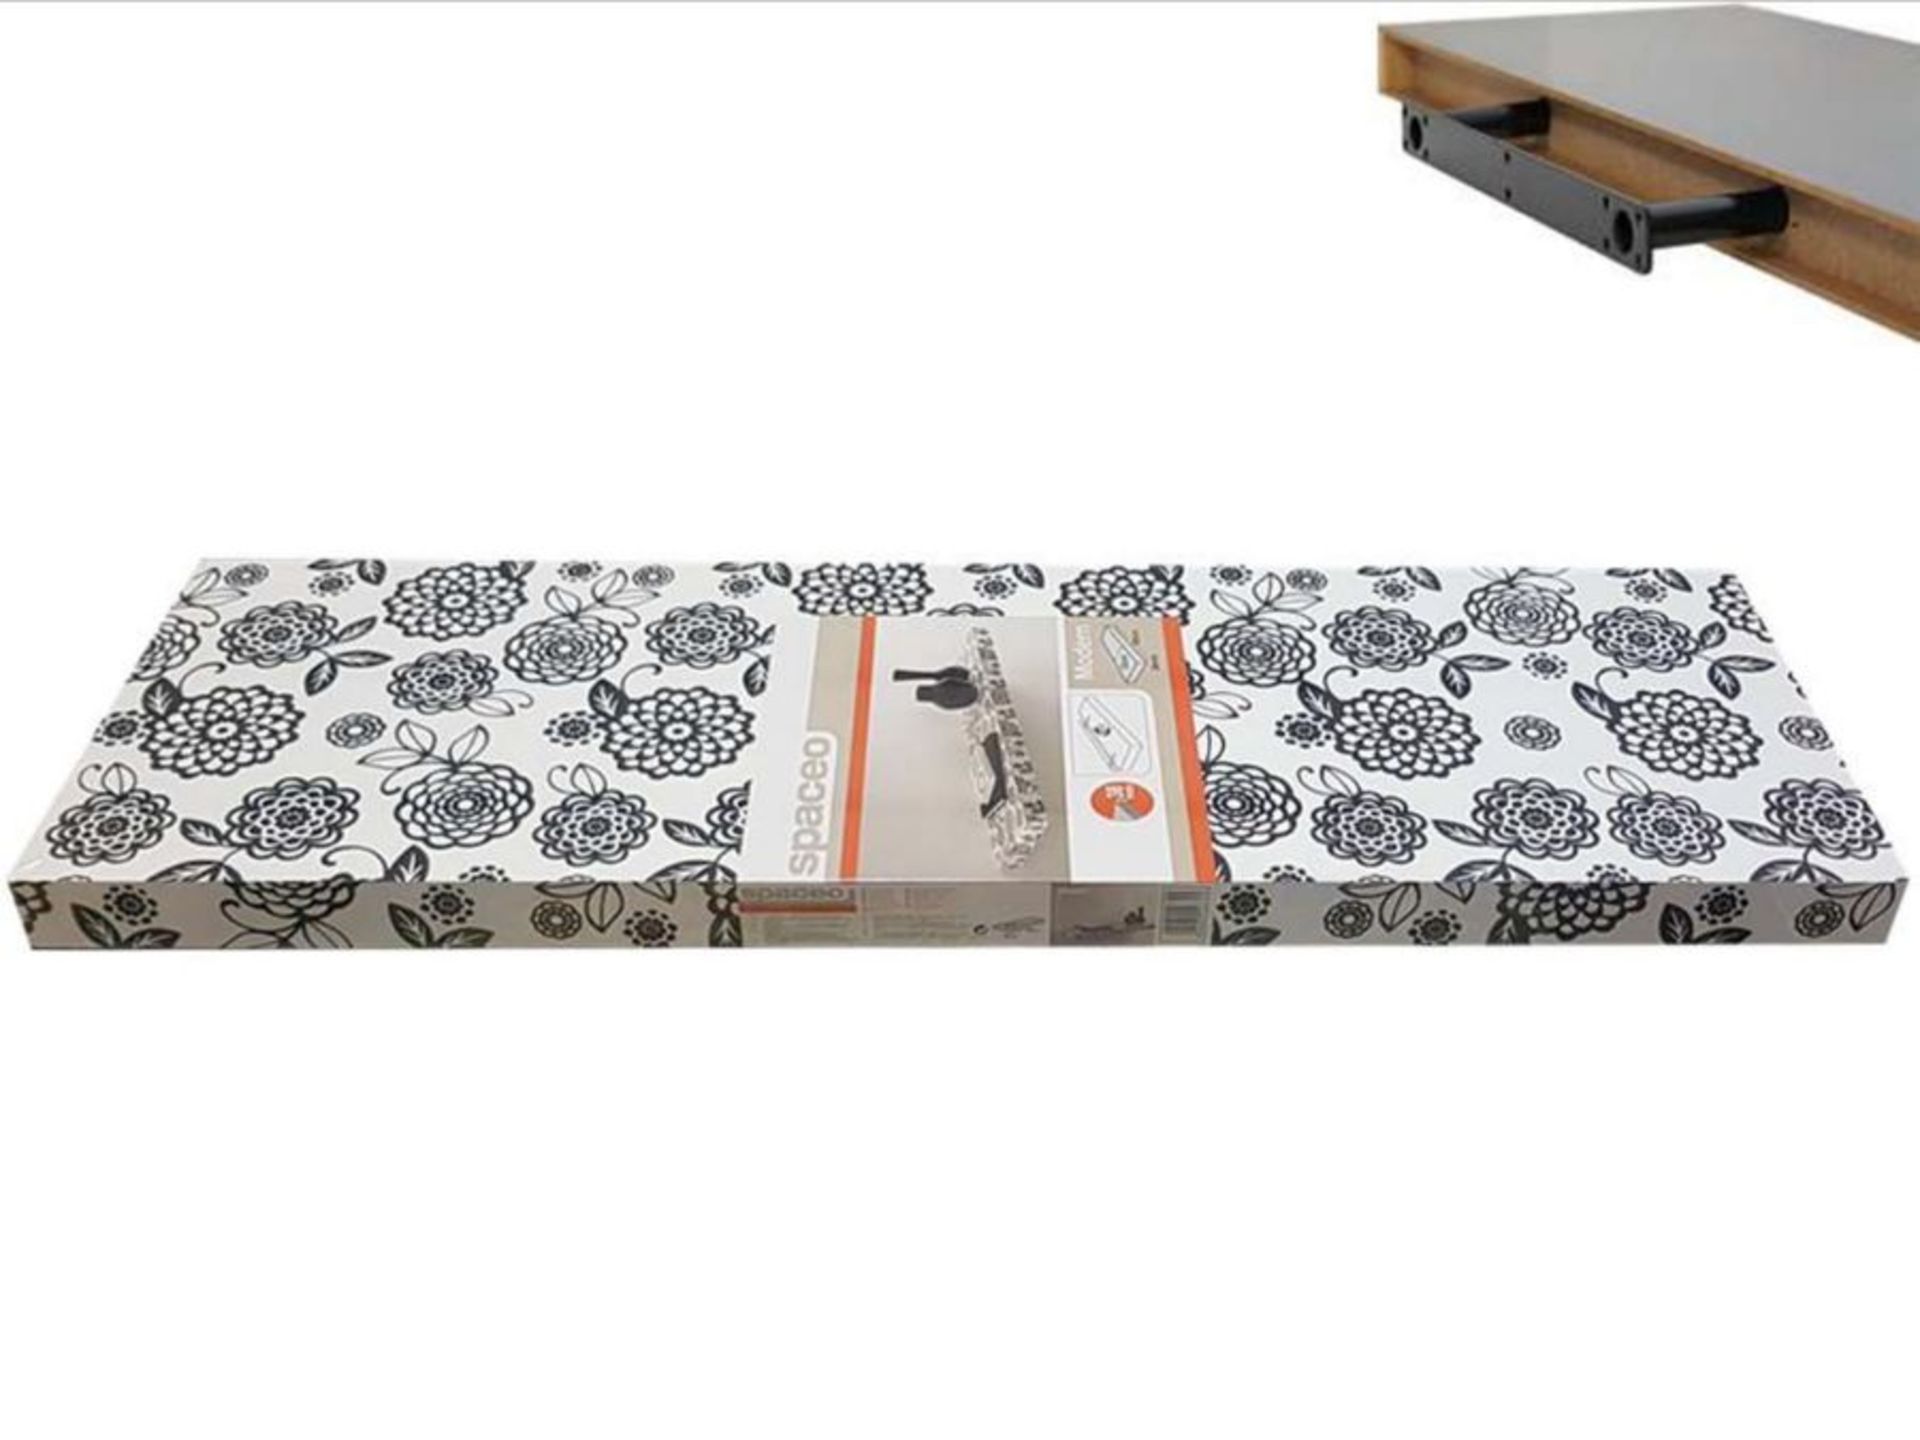 3 X BRAND NEW BOXED CHUNKY WHITE FLOATING SHELVES LACQUERED FLOWER PRINT 48CM X 25CM / RRP £59.97